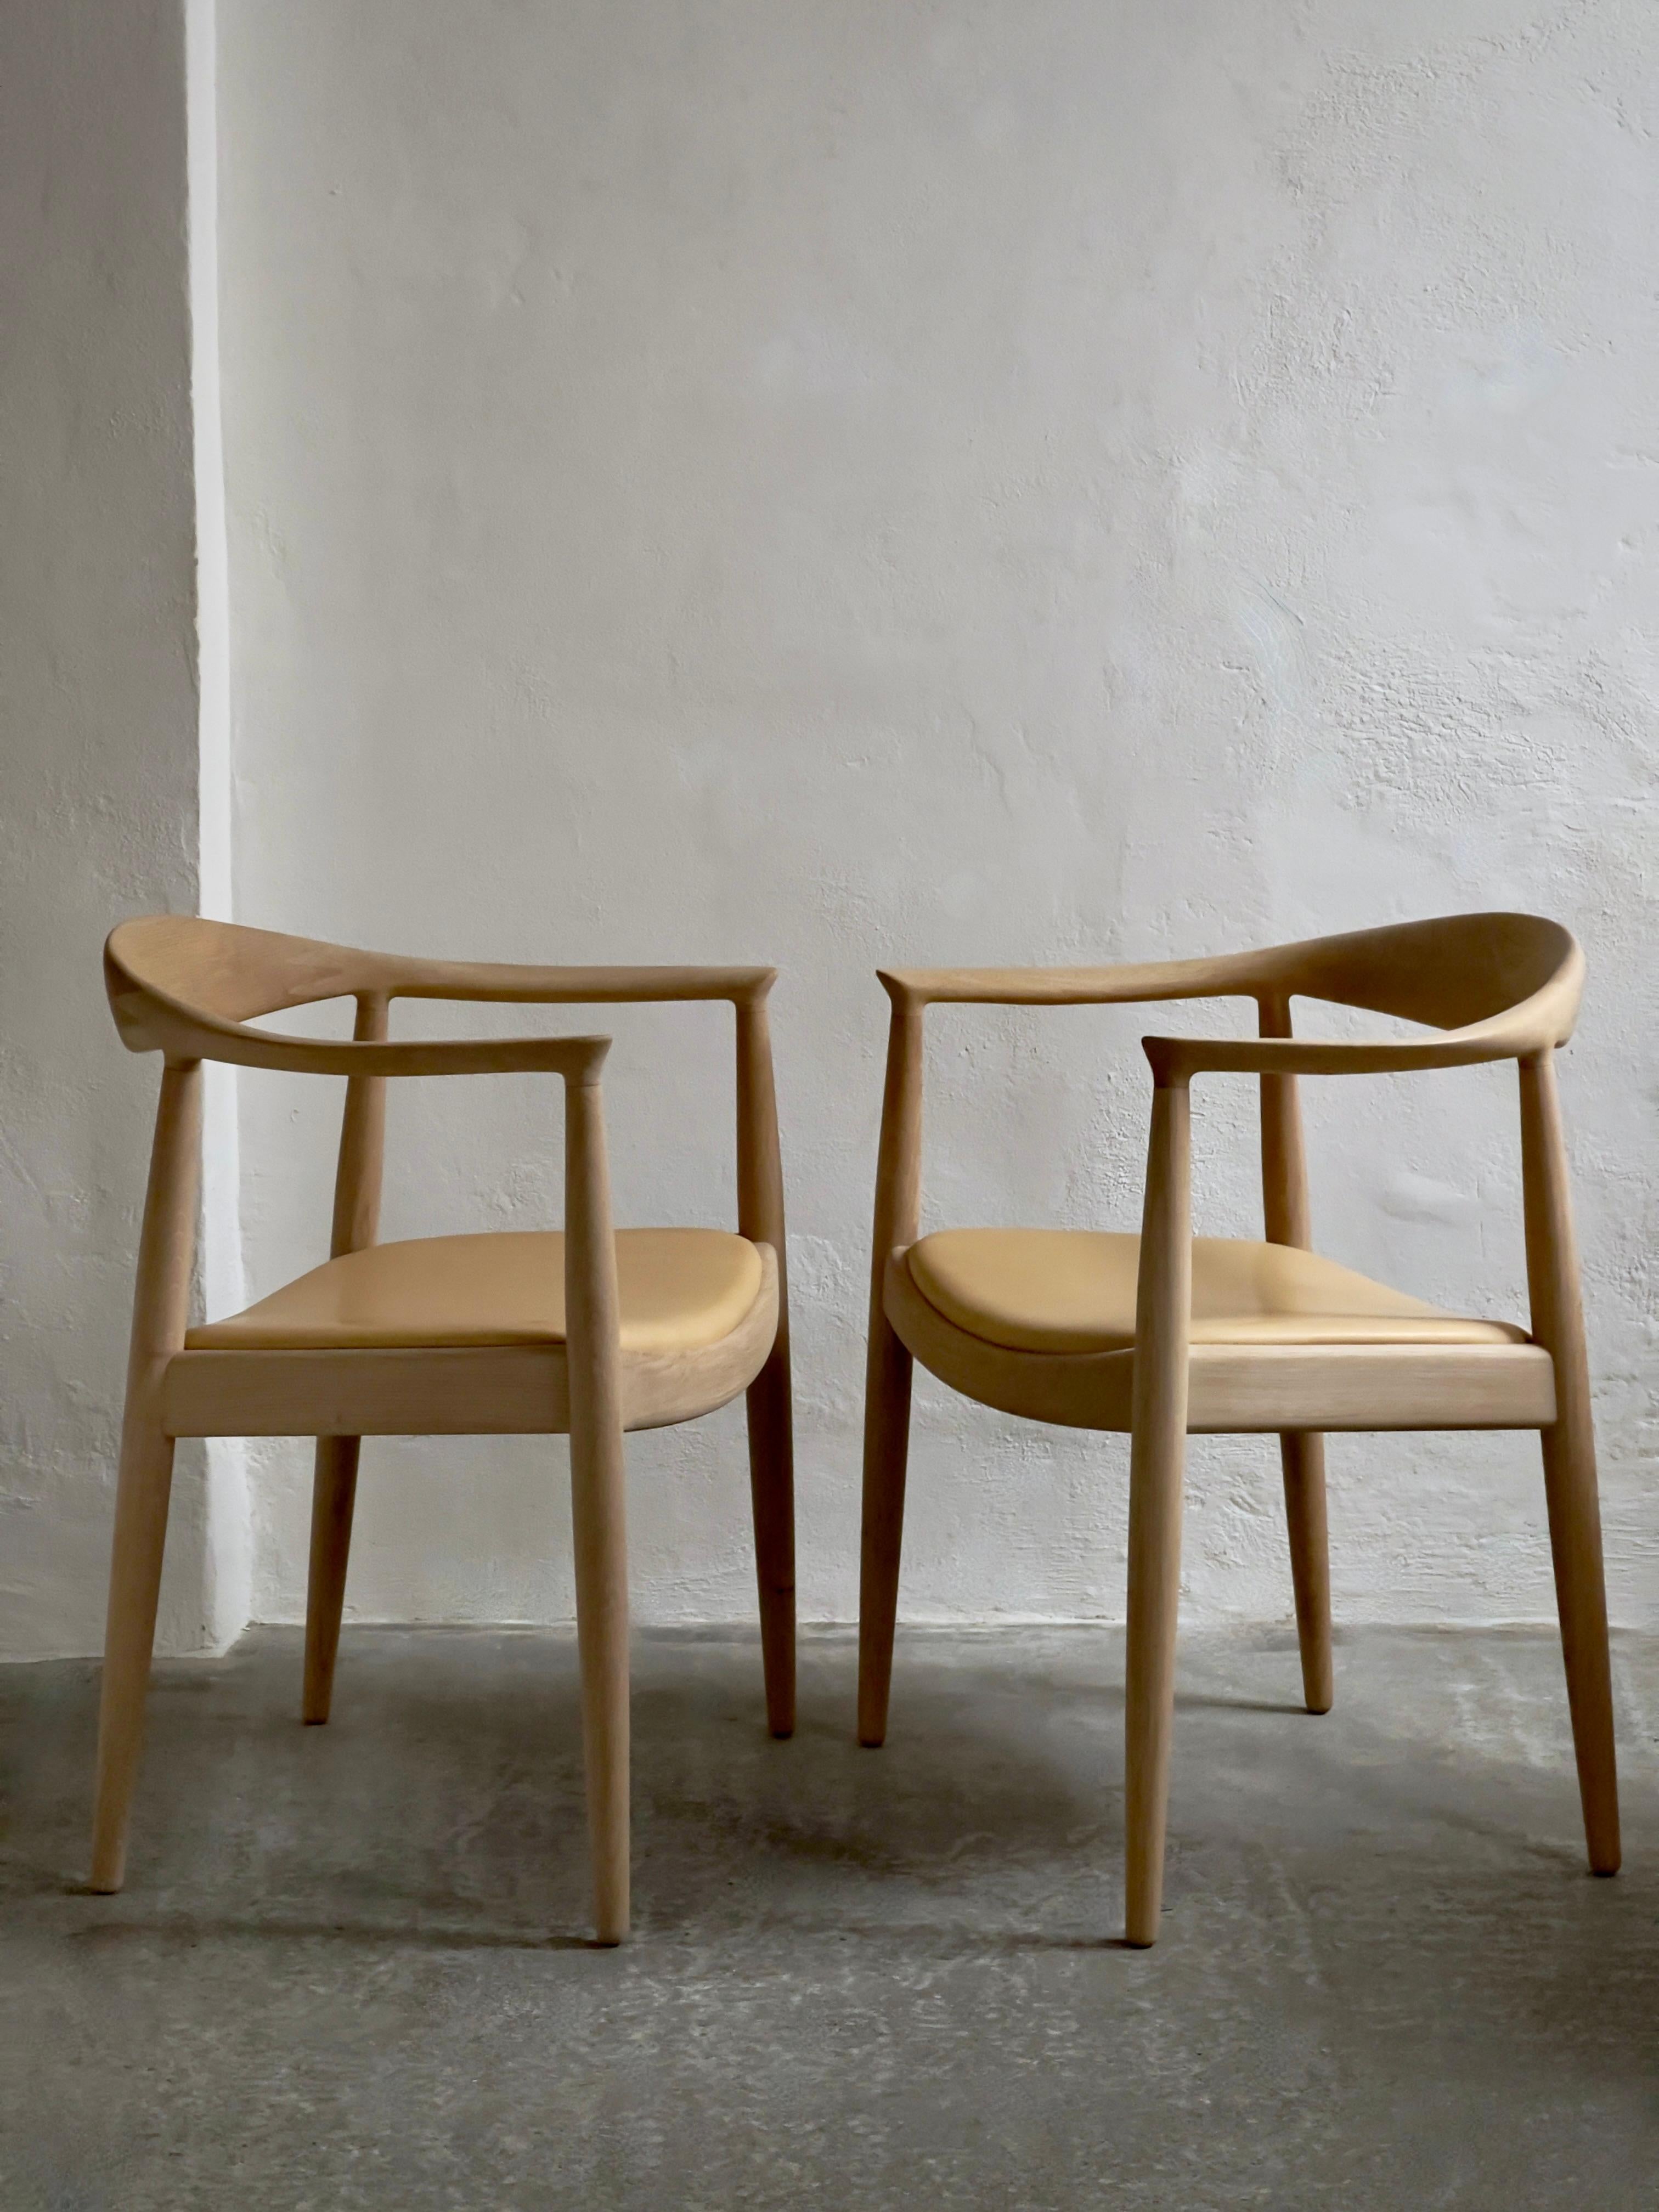 A pair of 'The Chair' by Hans J Wegner (1949) in soap treated oak and leather. 6